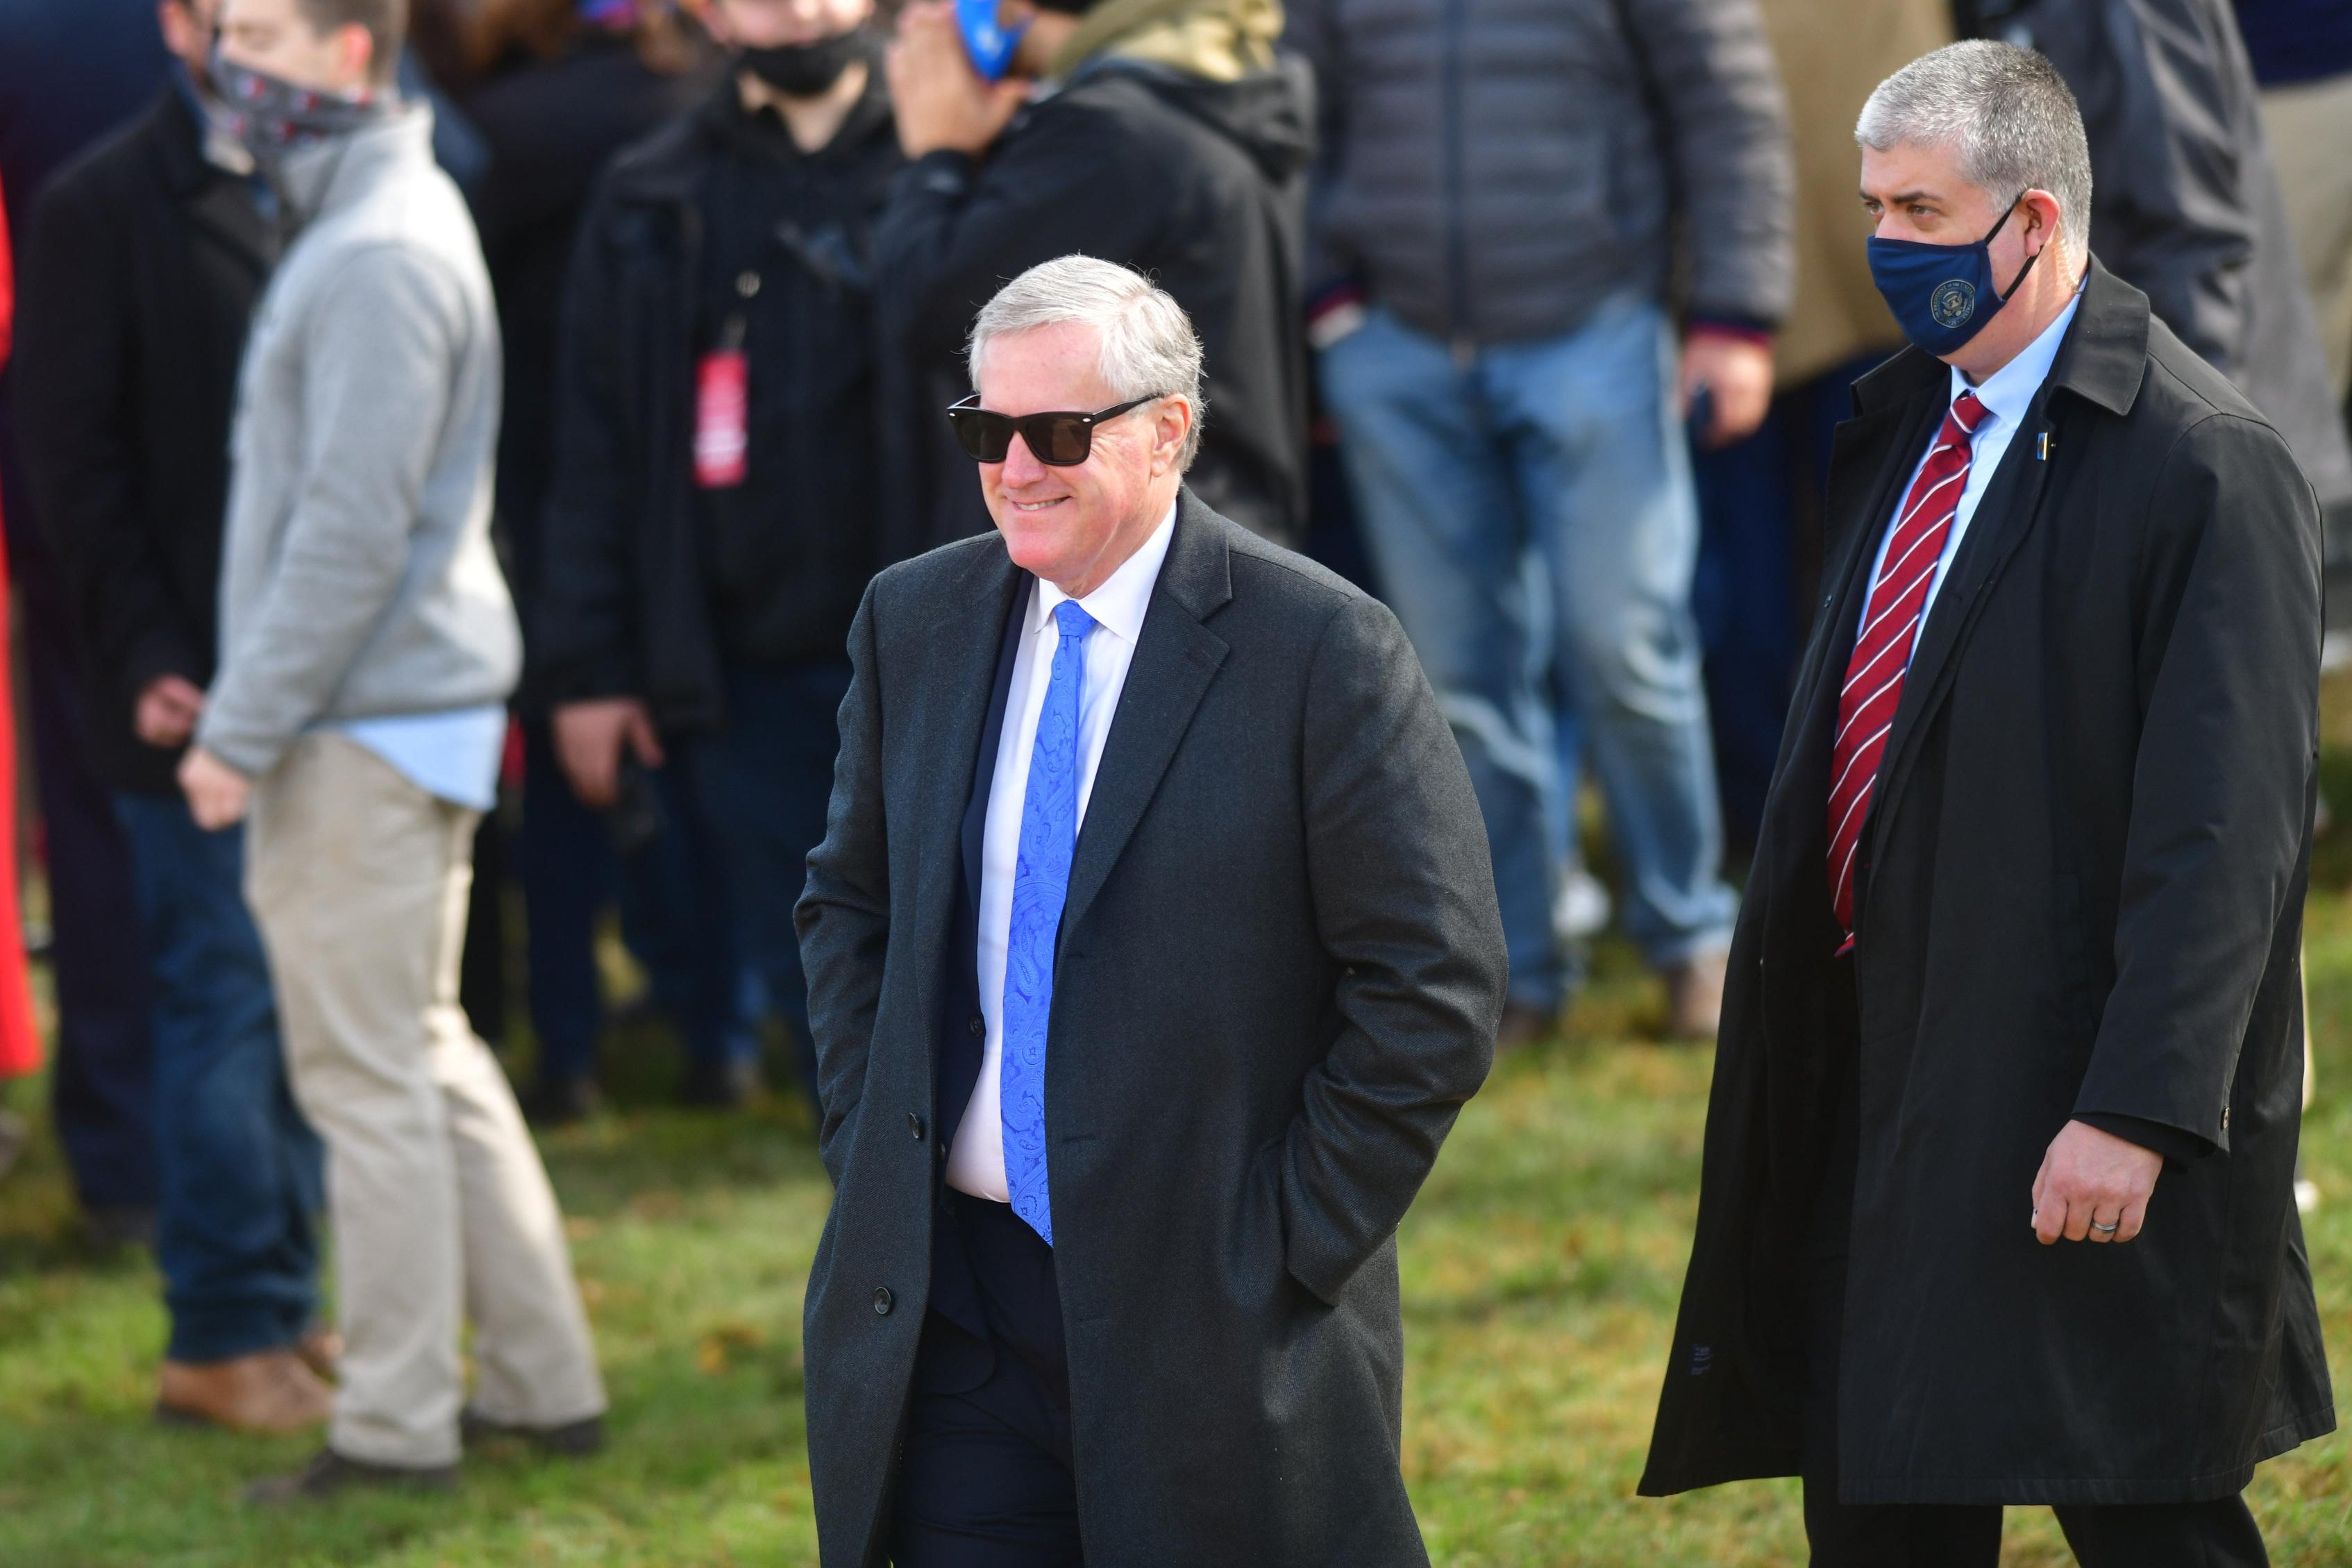 Mark Meadows smiles as he walks with his hands in the pockets of his trenchcoat in front of a crowd of Trump supporters standing on grass